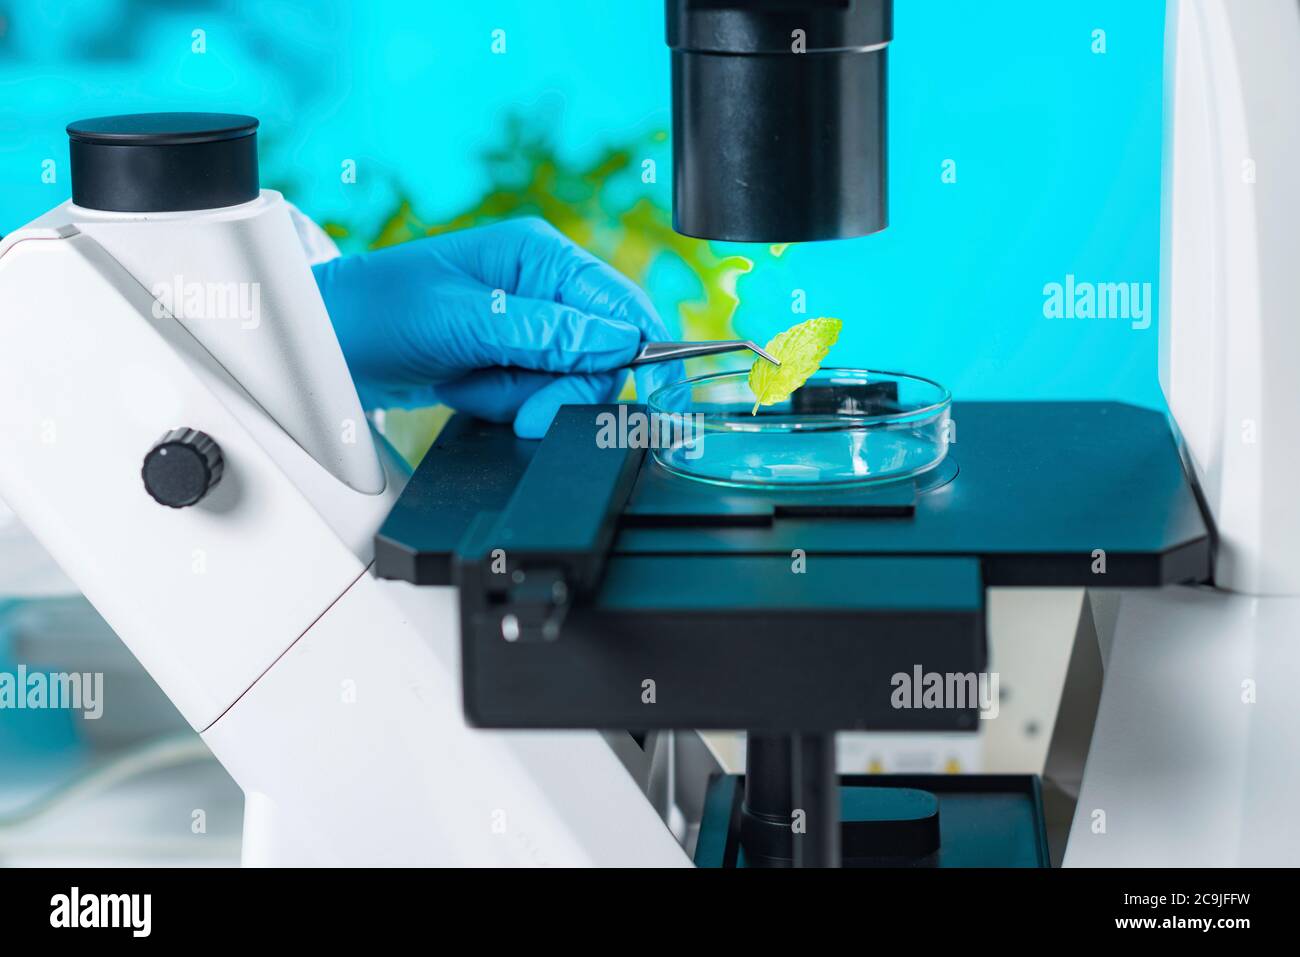 Plant laboratory. Biology technician working with plants. Examining plant tissue with microscope. Stock Photo